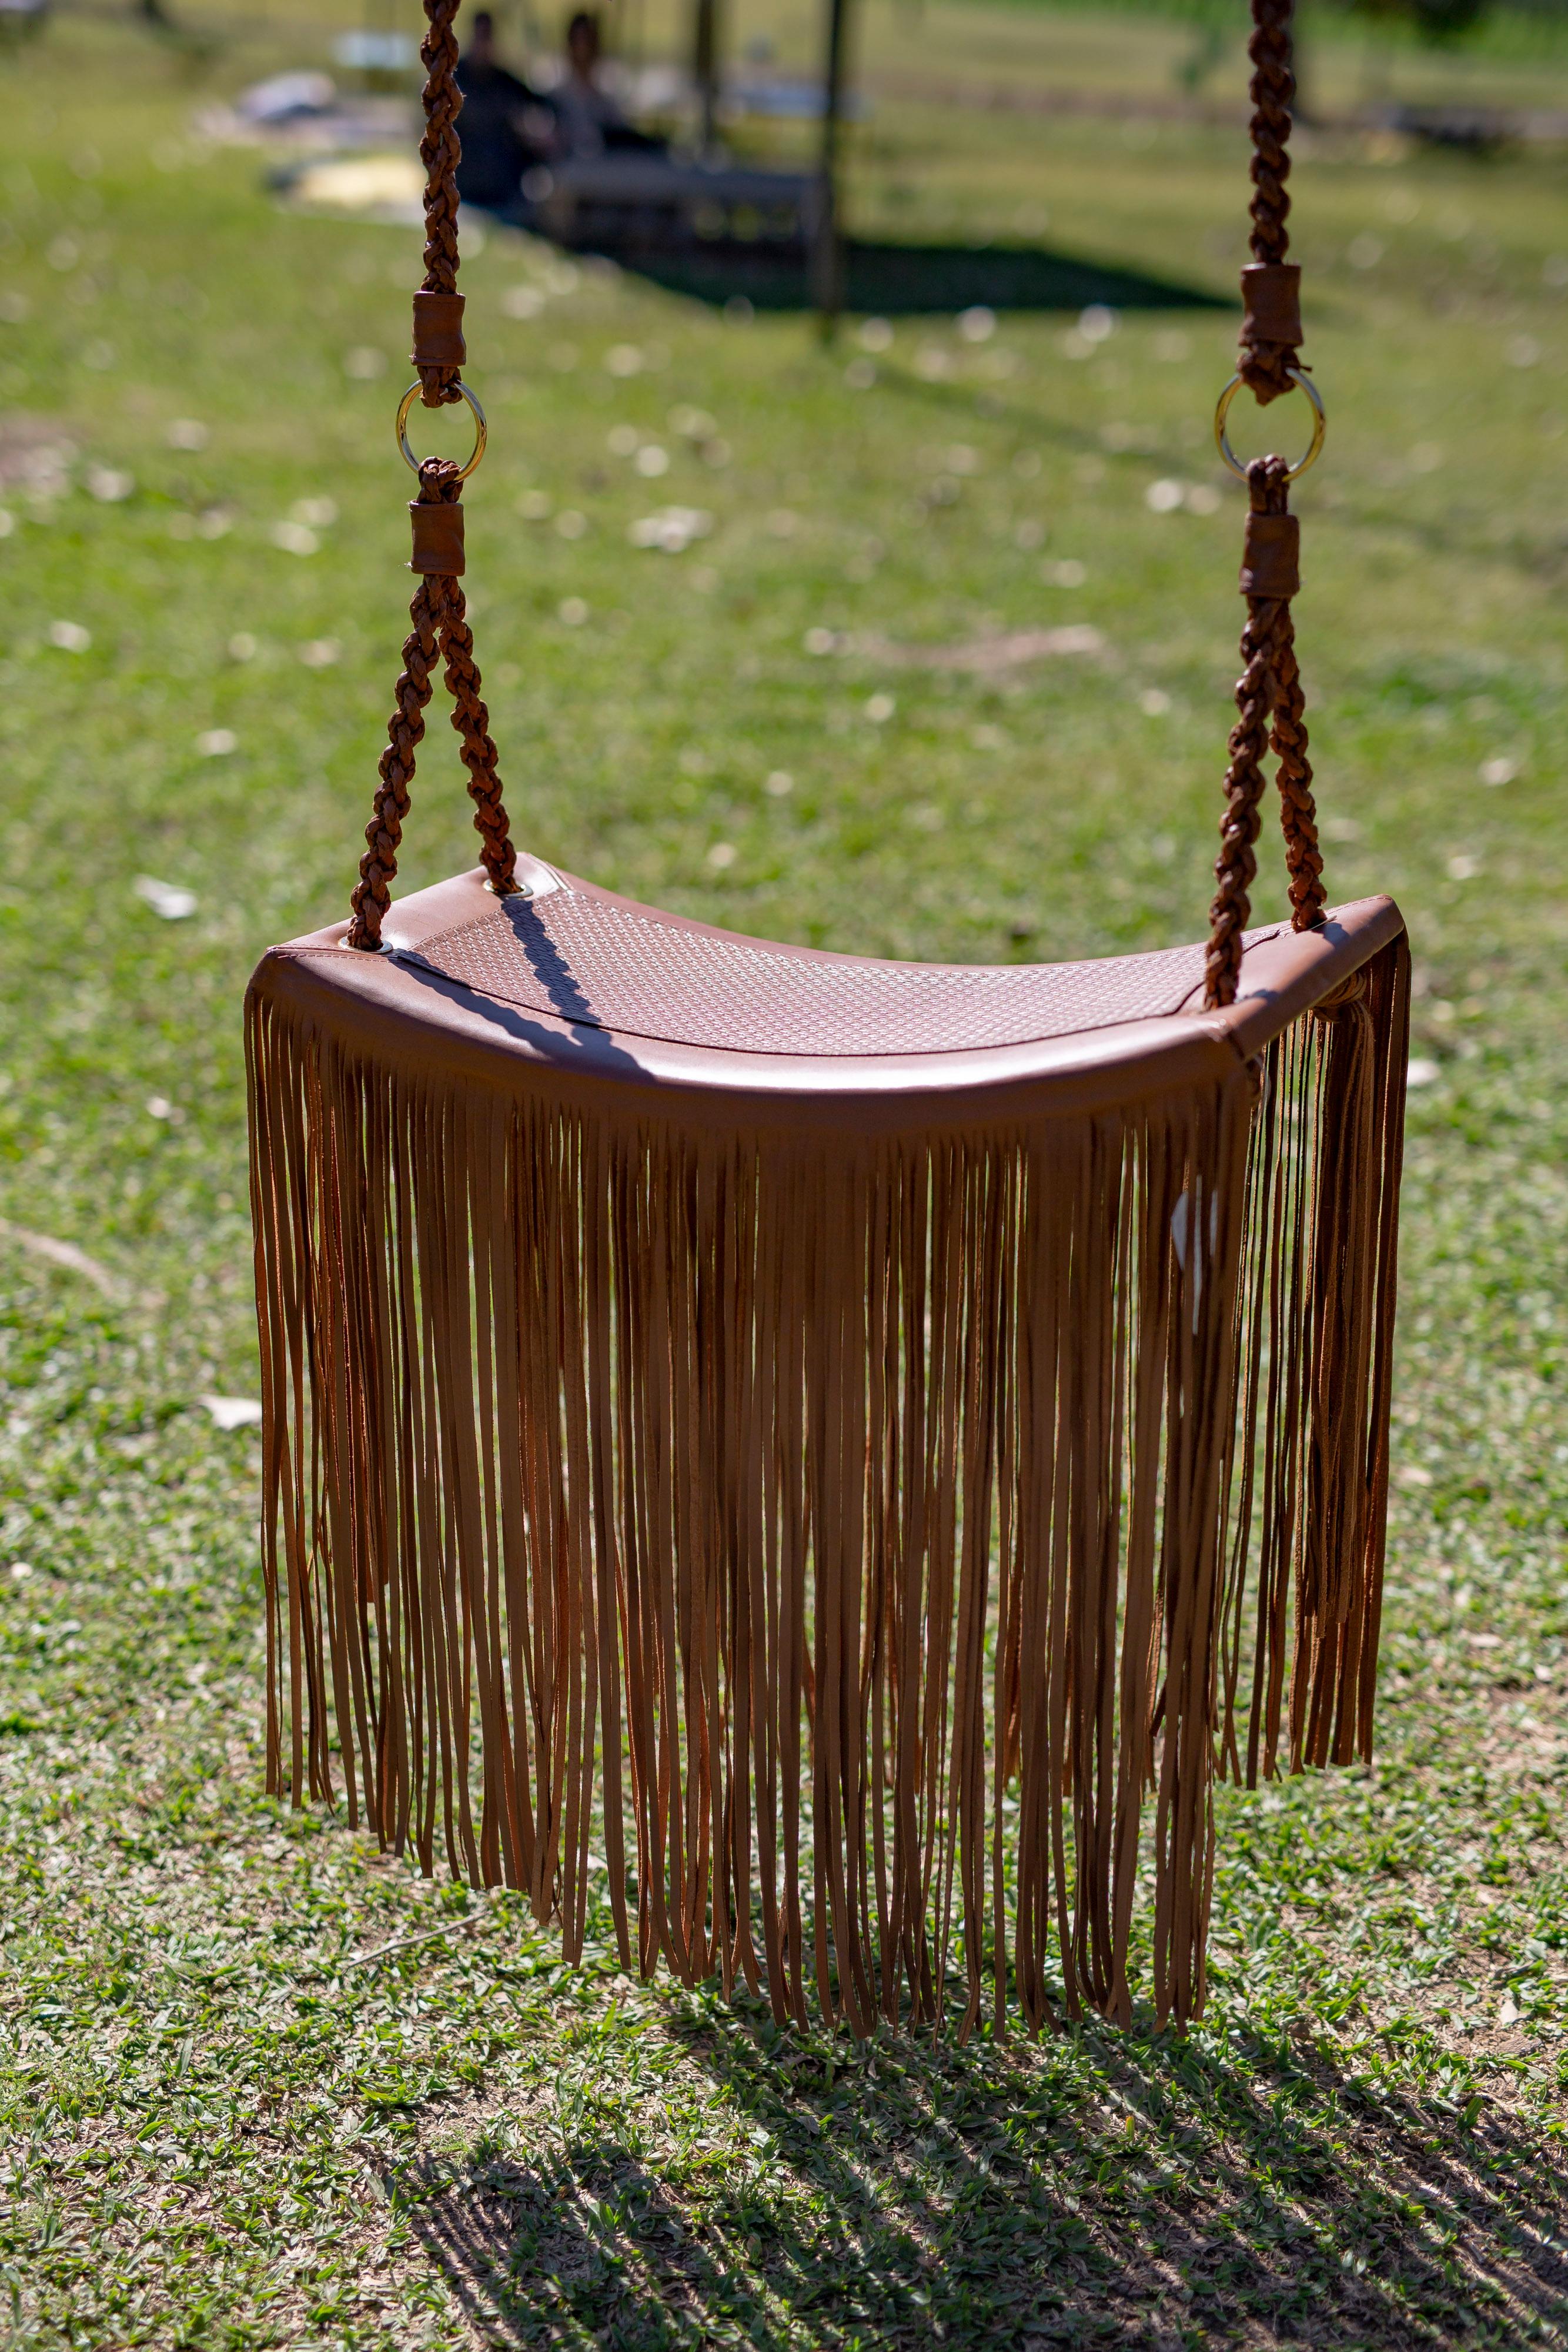 Hand-Crafted Revoar Swing in Caramel Leather, Modern Style by Marta Manente For Sale